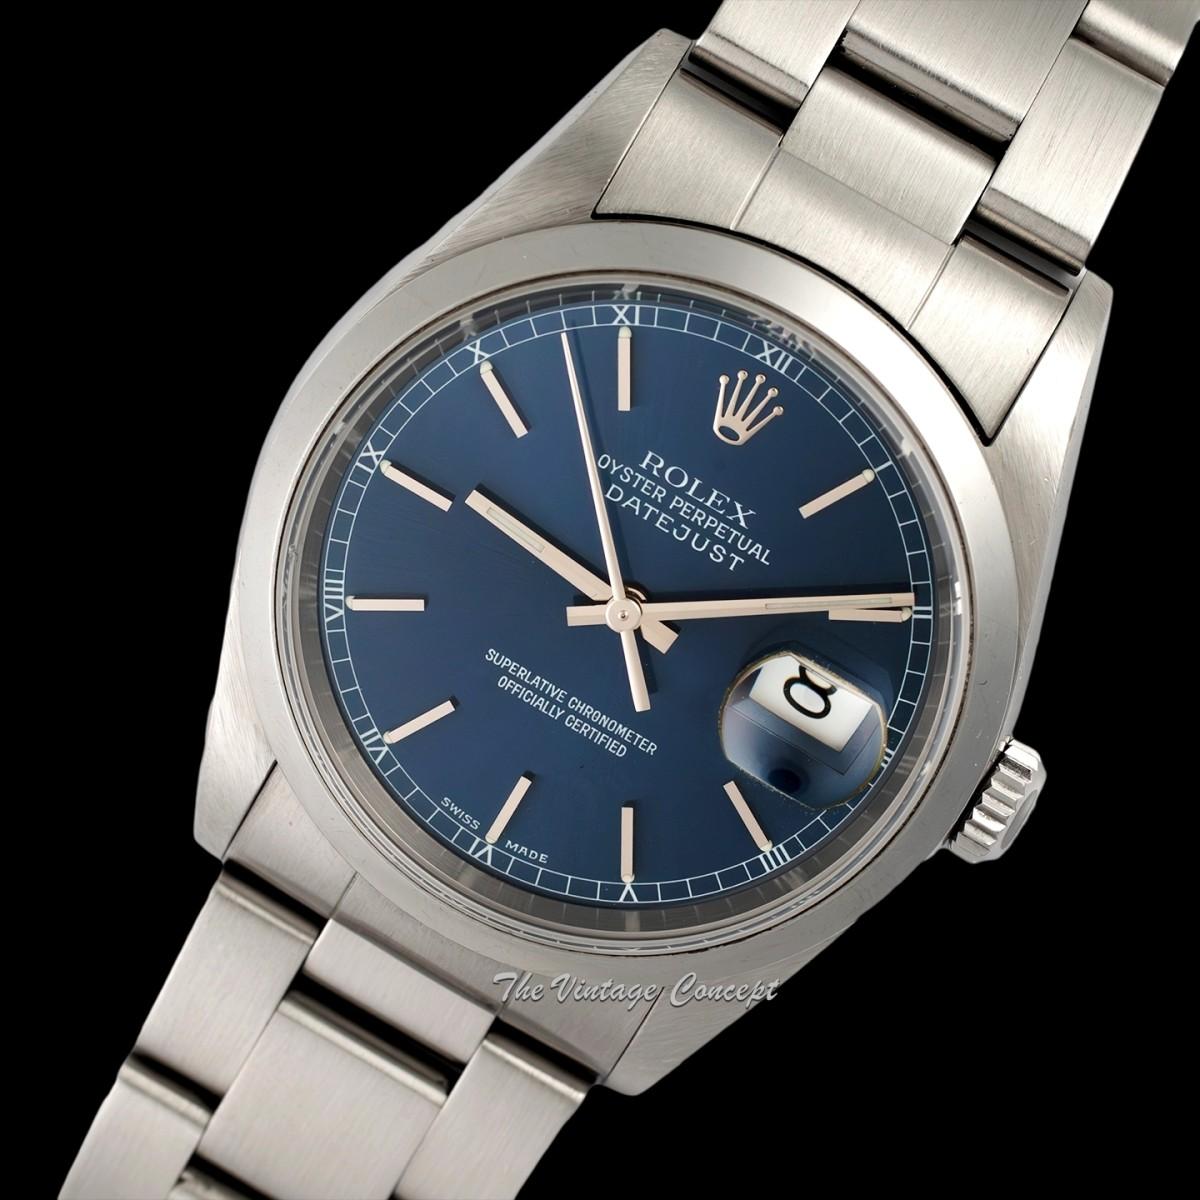 Rolex Steel Oyster Perpetual Datejust Blue Dial 16200 w/ Original Paper & Tag